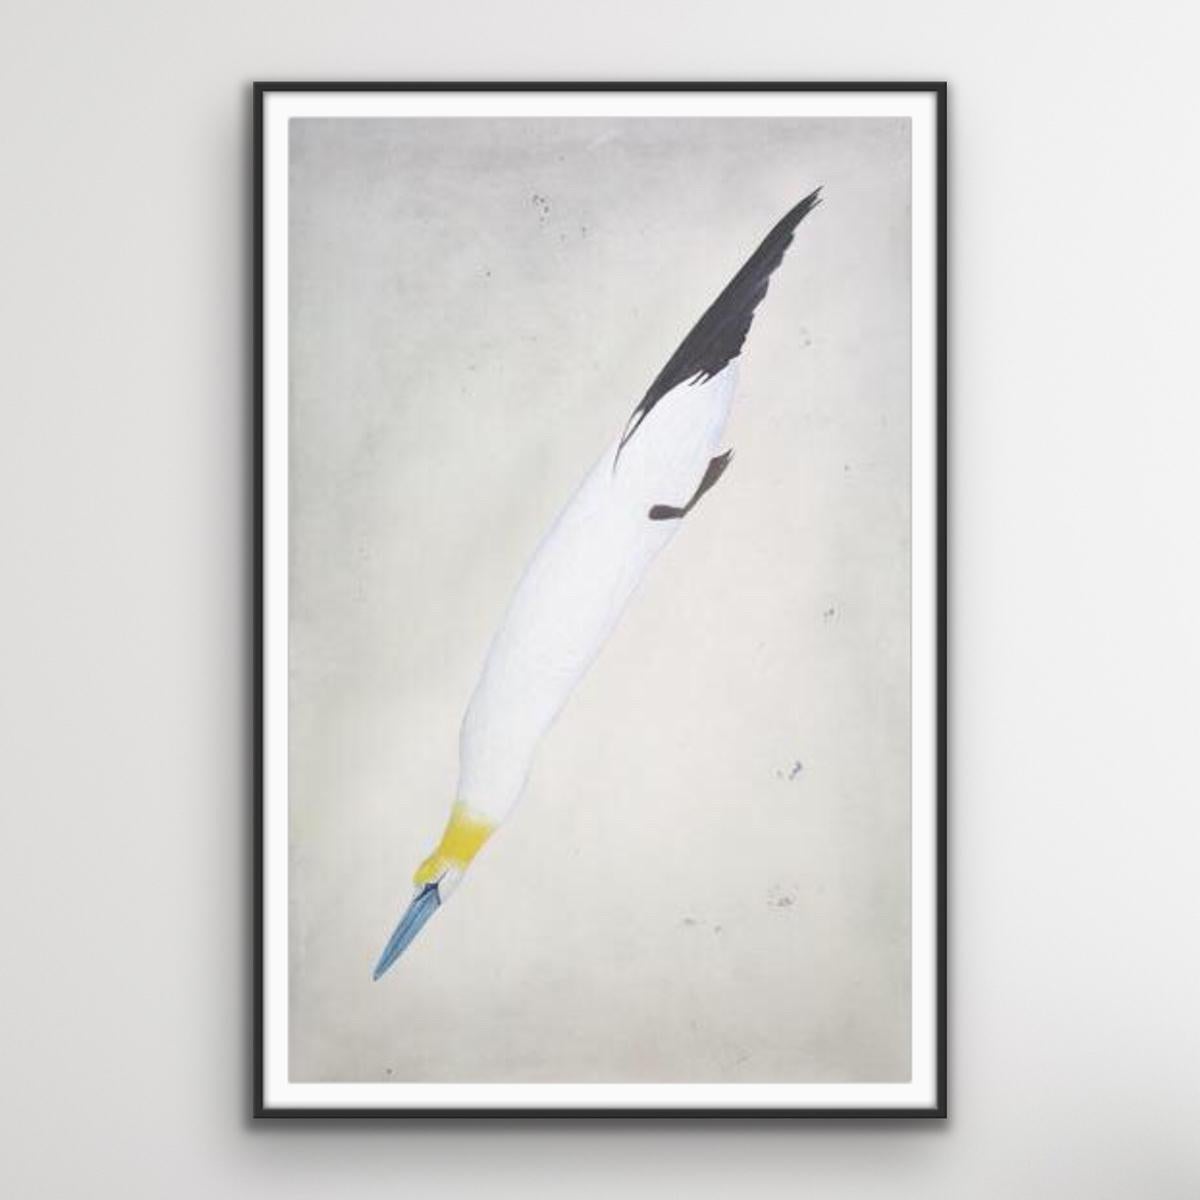 Gannet, Kate Boxer, Limited edition print, Drypoint print, Bird and Wildlife art - Contemporary Print by Kate Boxer 